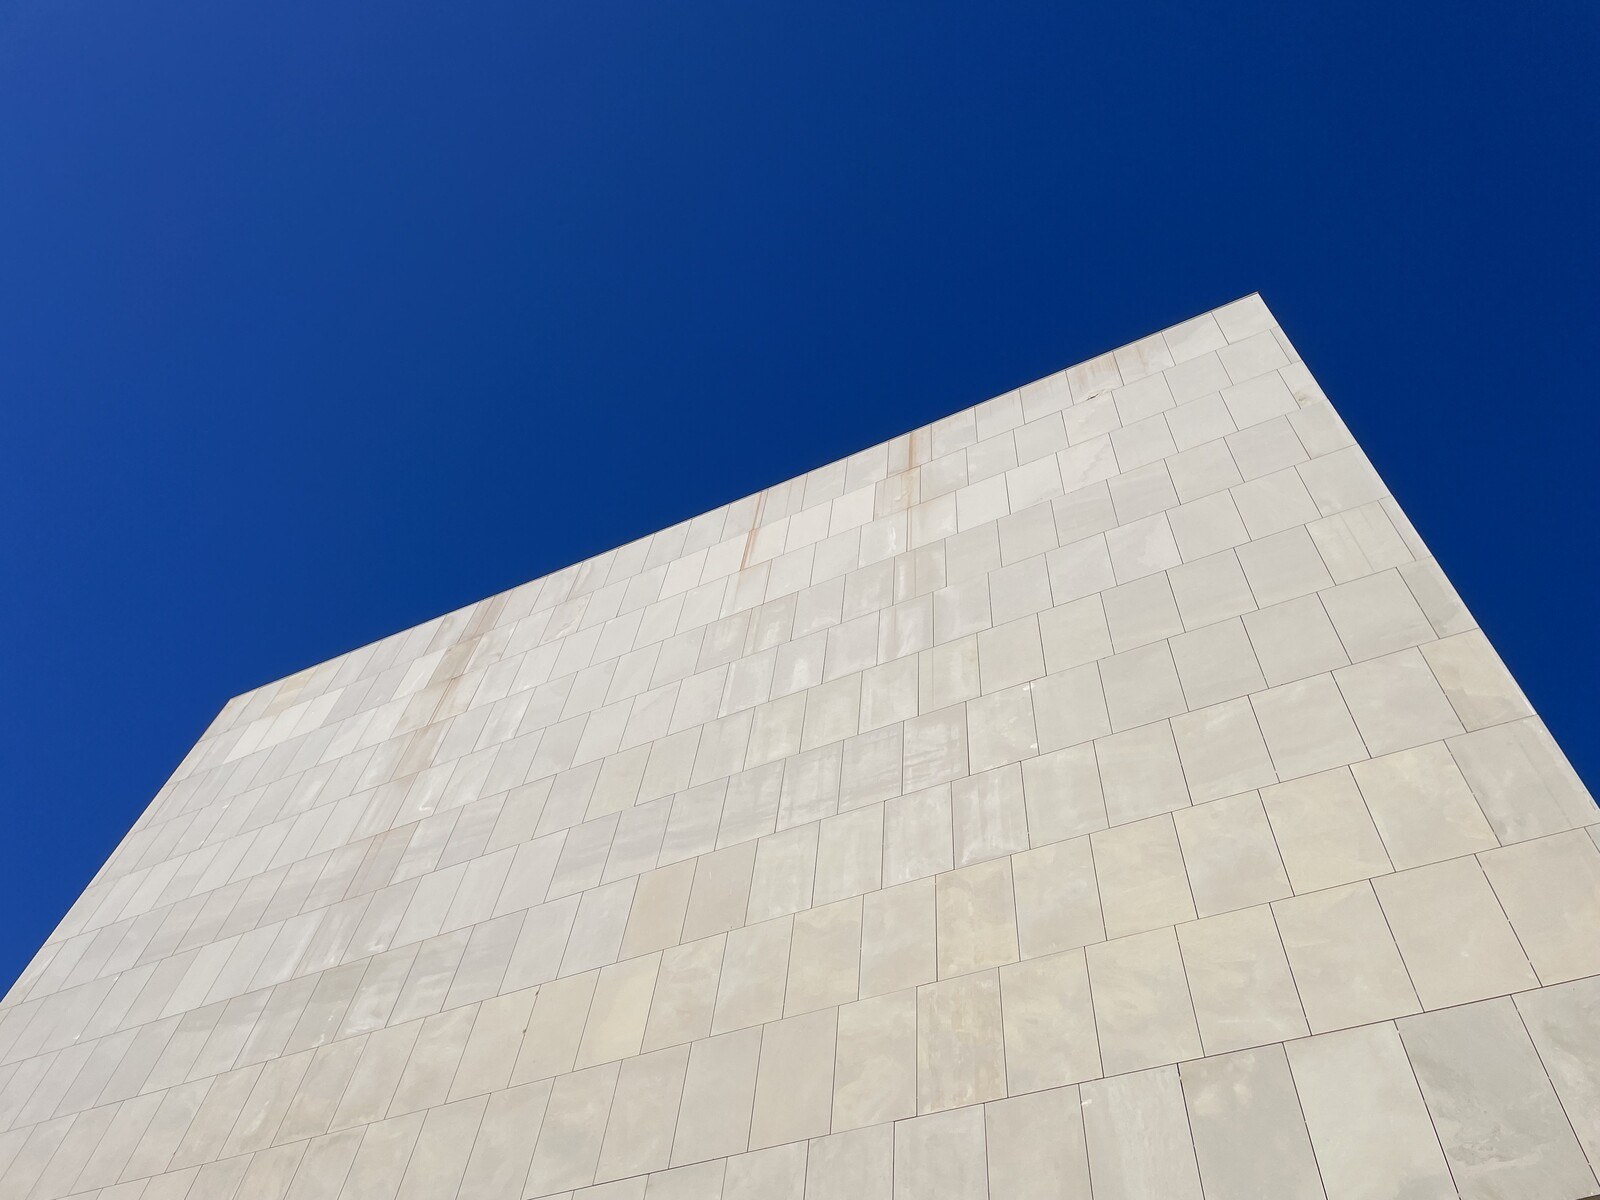 The tall, flat, featureless facade of the Torrevieja theatre, looming into a bright blue sky